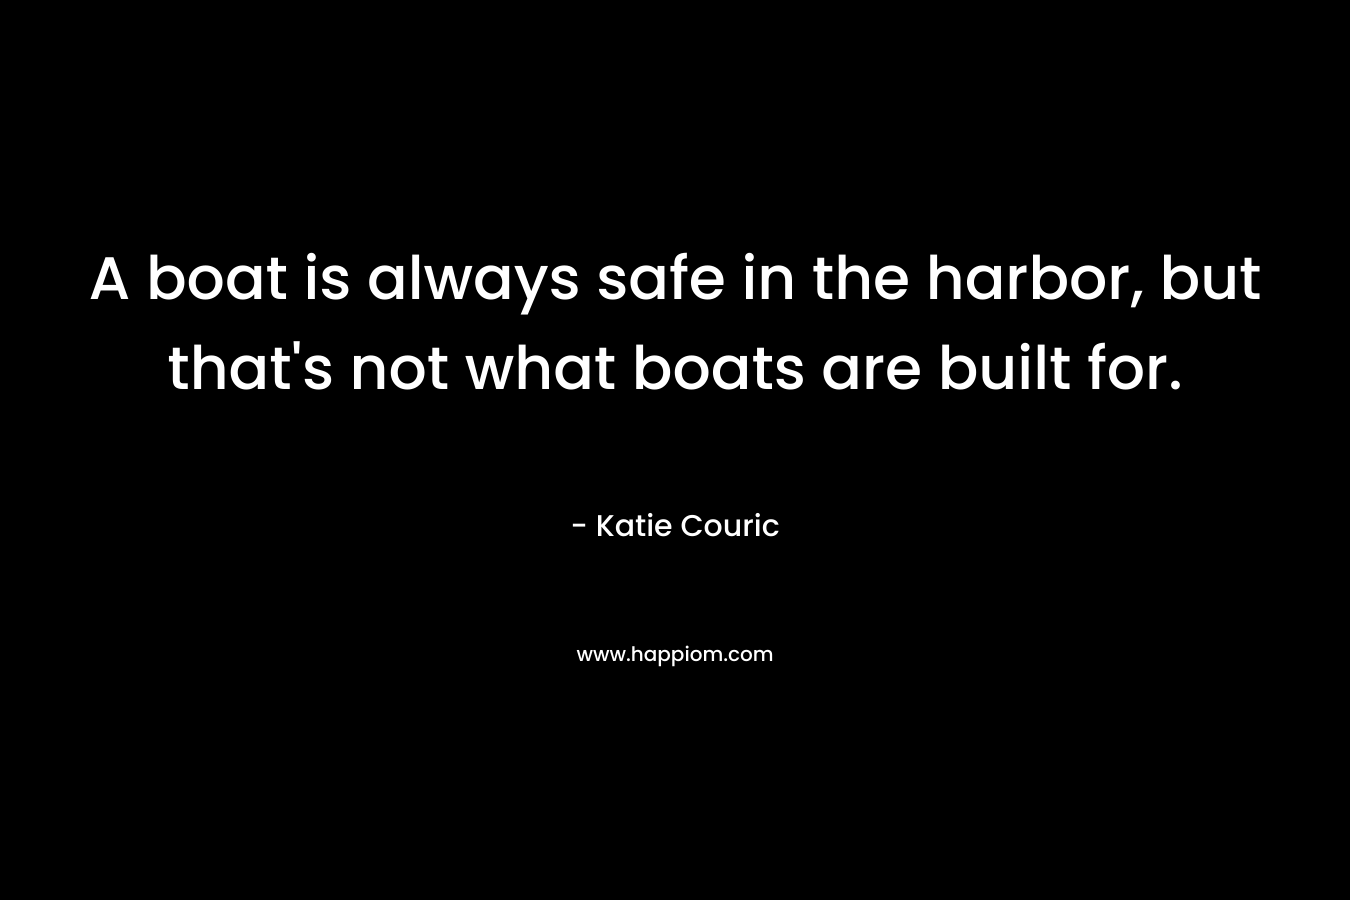 A boat is always safe in the harbor, but that’s not what boats are built for. – Katie Couric